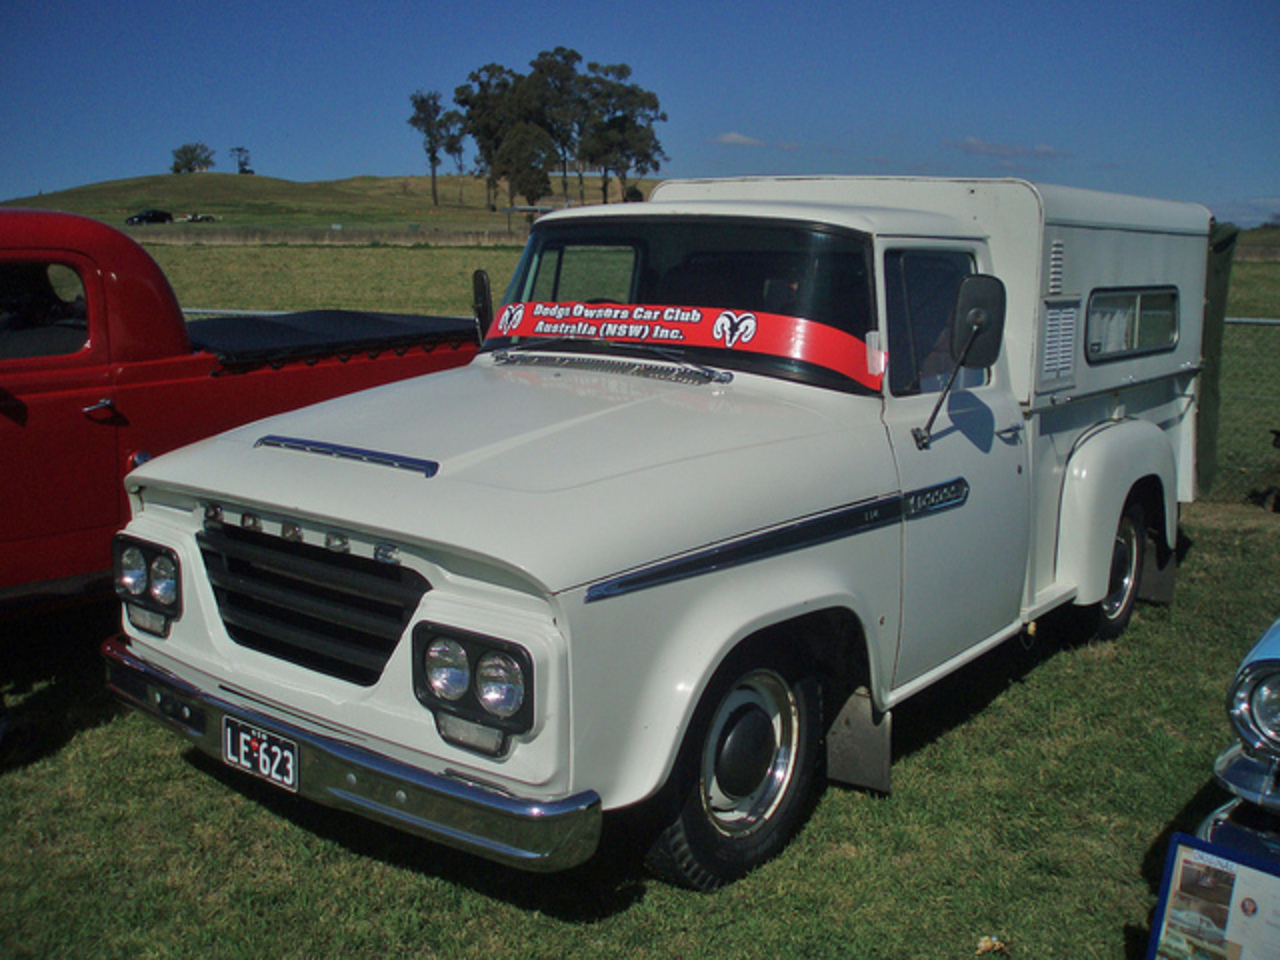 Dodge AT4 114 ute. Taken at Shannon's Eastern Creek Classic 2009,